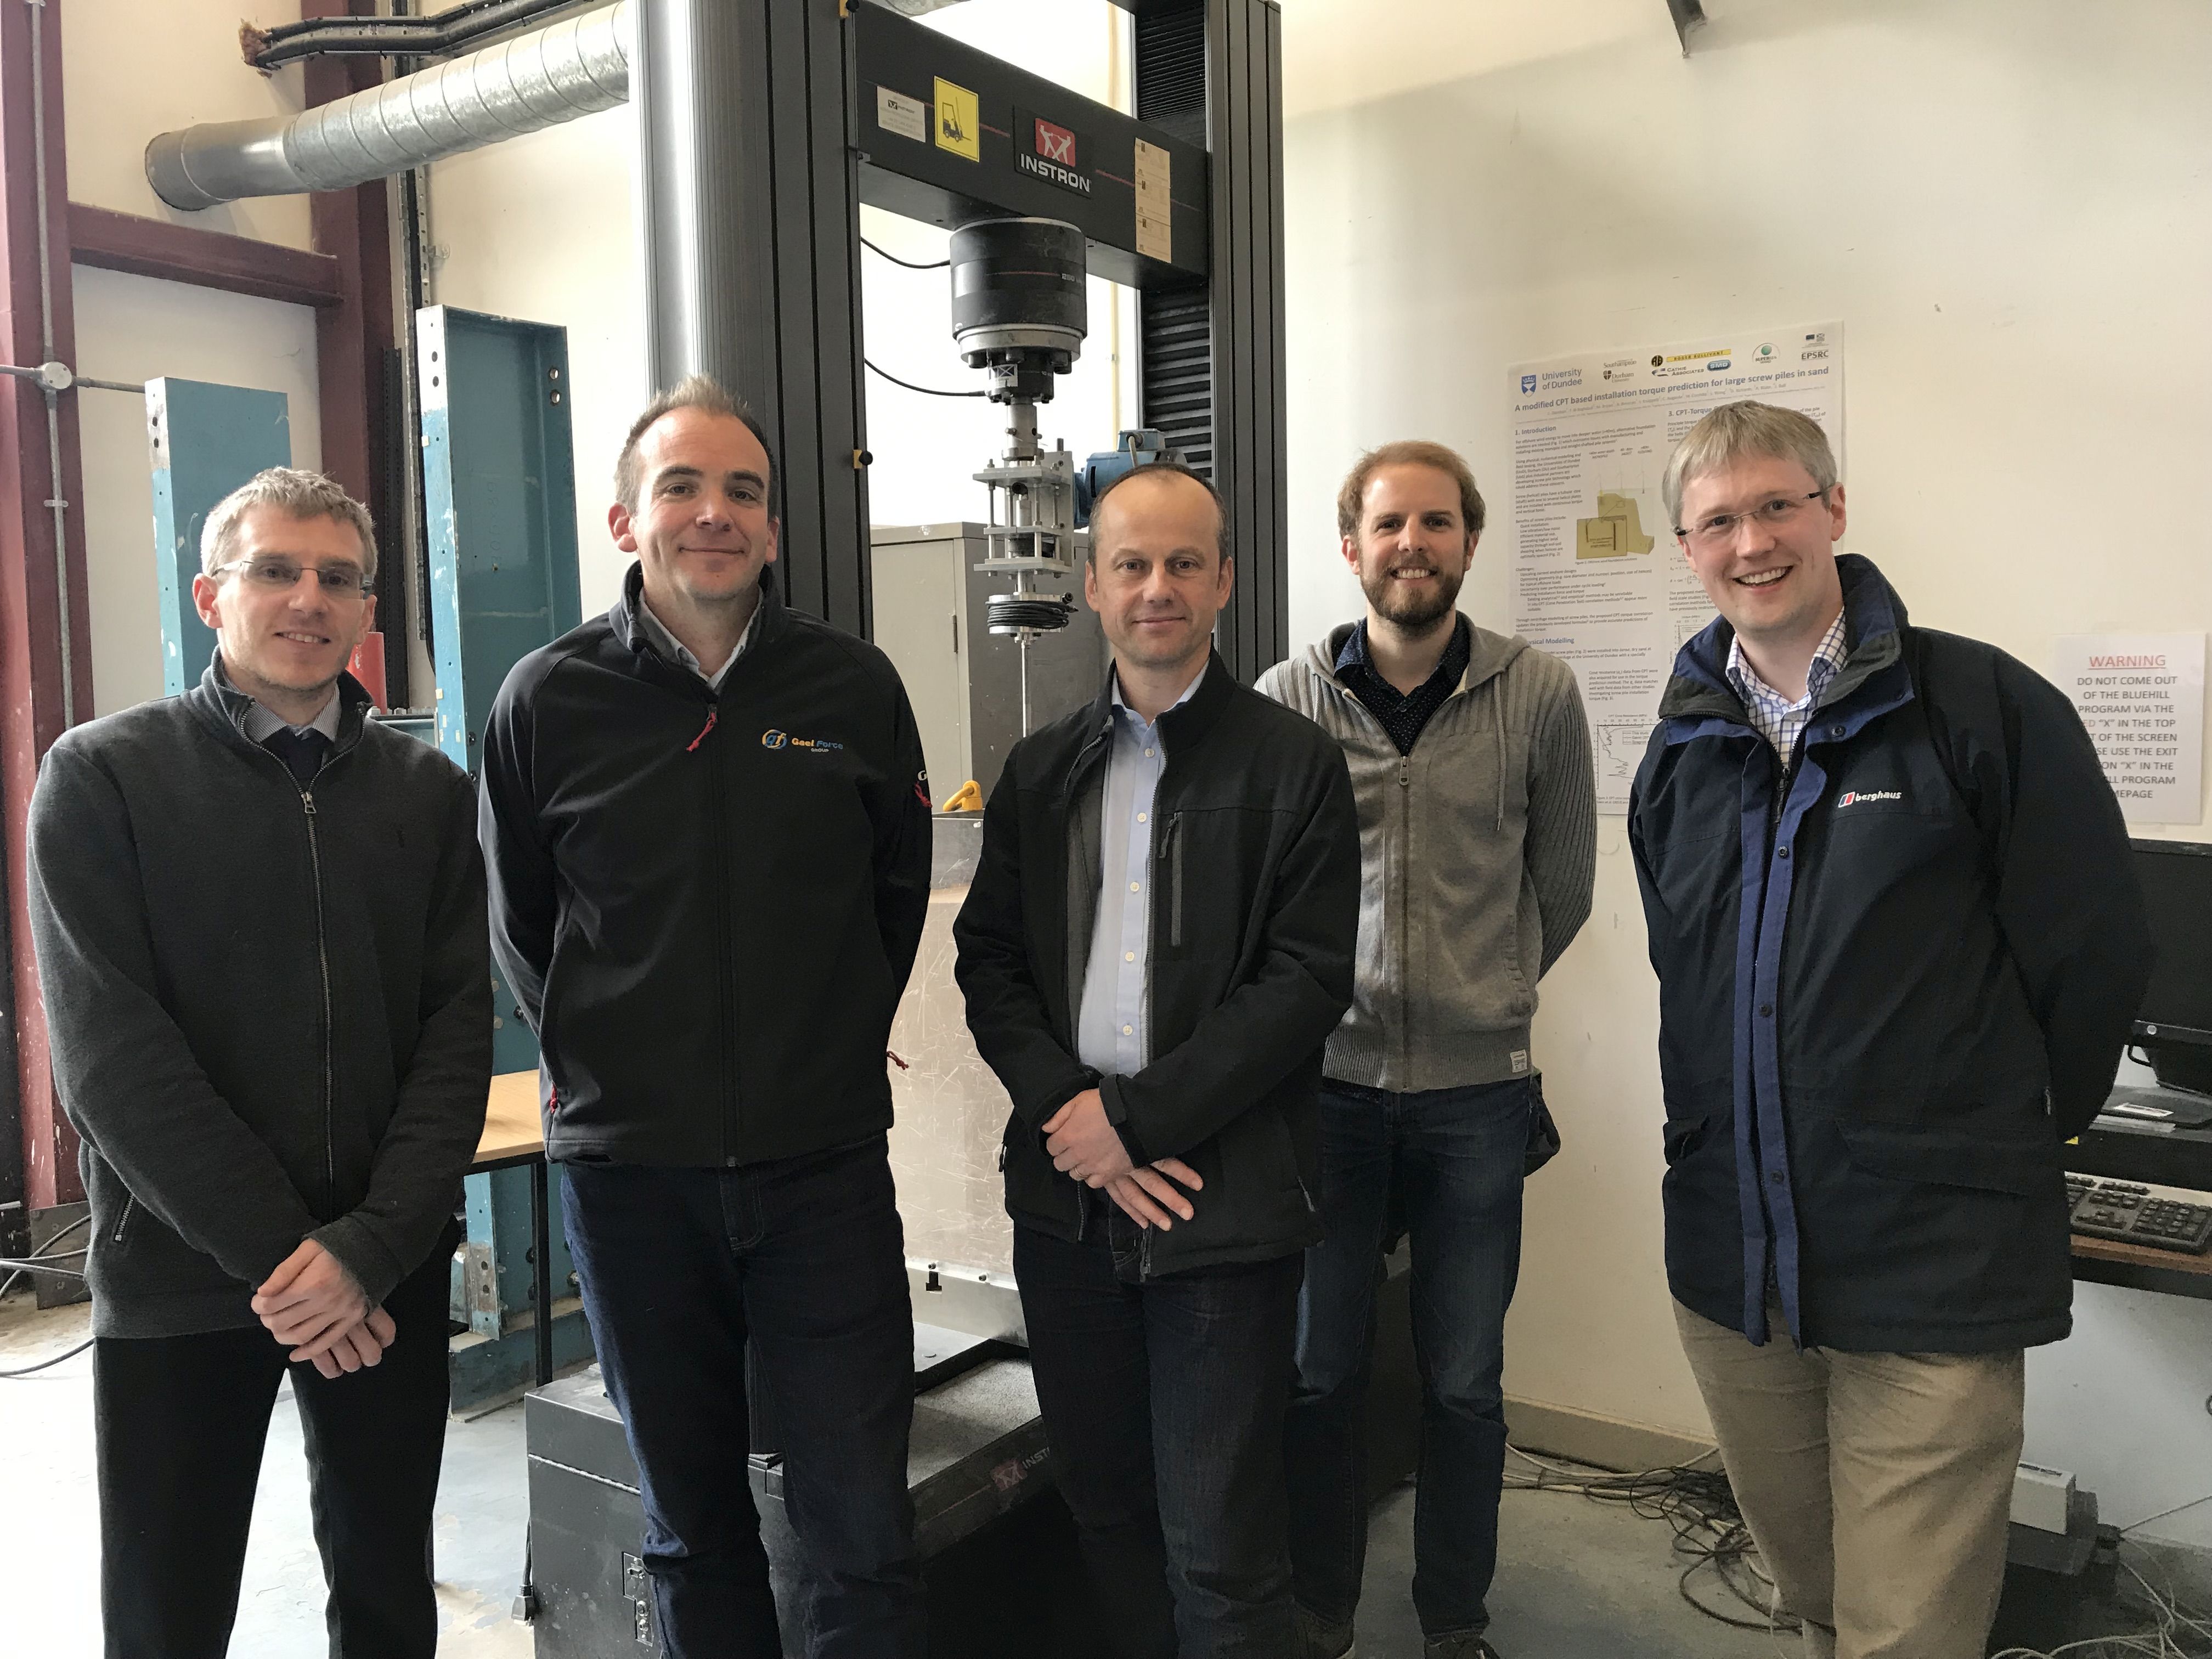 Consortium members (left to right): Adam Caton (SME), Jamie Young (Gael Force), Andy Hunt (SME), Benjamin Cerfontaine (University of Dundee), and Jonathan Knappett (University of Dundee)

 